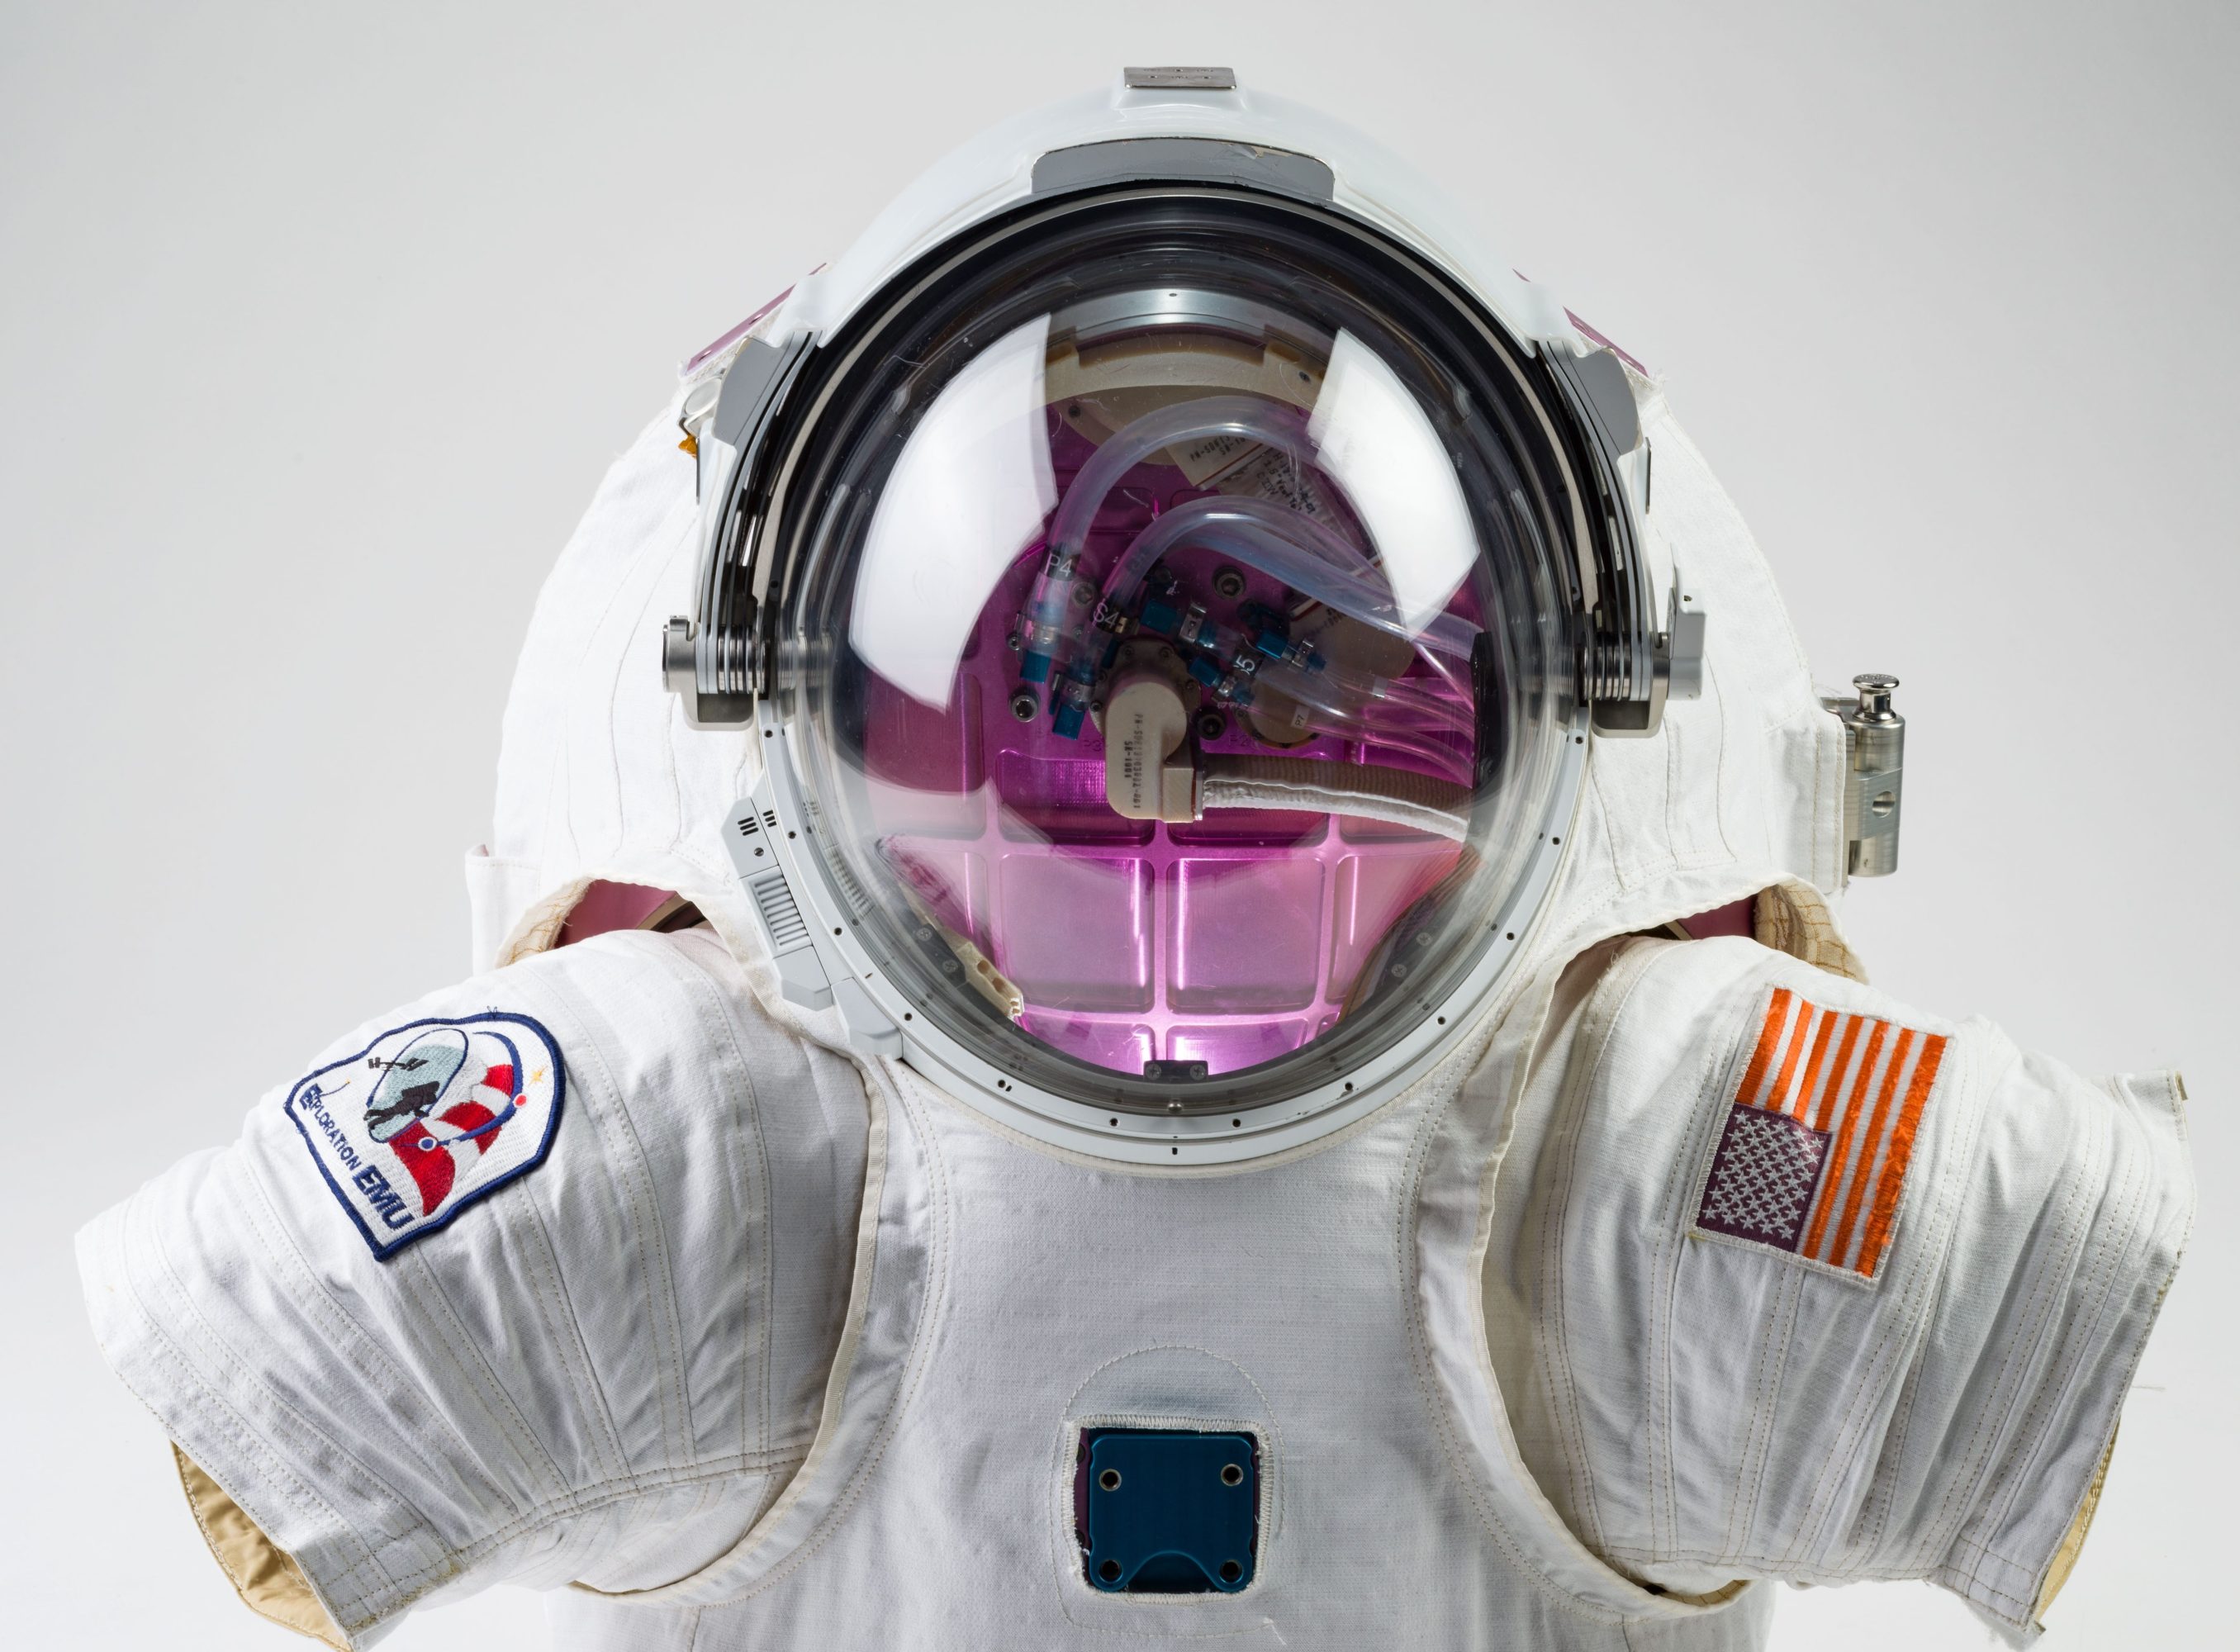 Current spacesuits won't cut it on the moon. So NASA made new ones.